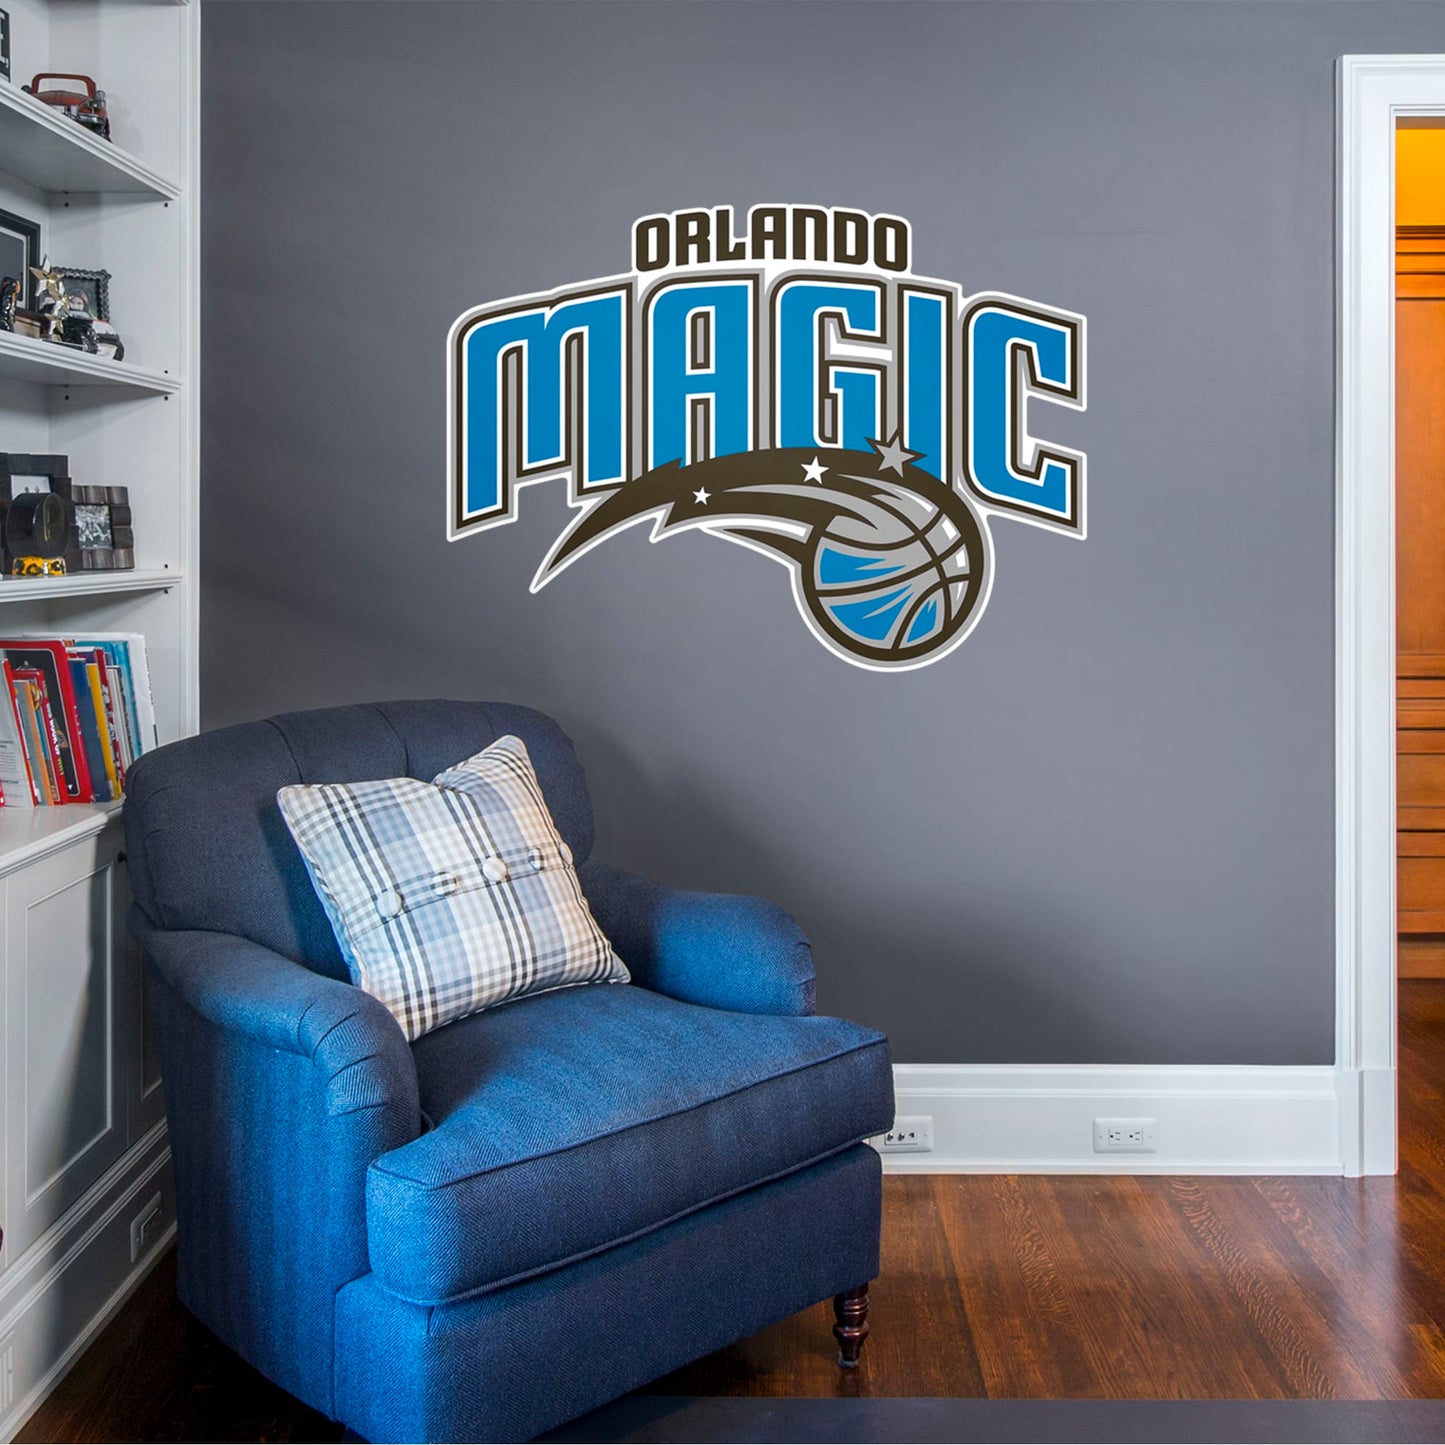 Orlando Magic: Logo - Officially Licensed NBA Removable Wall Decal